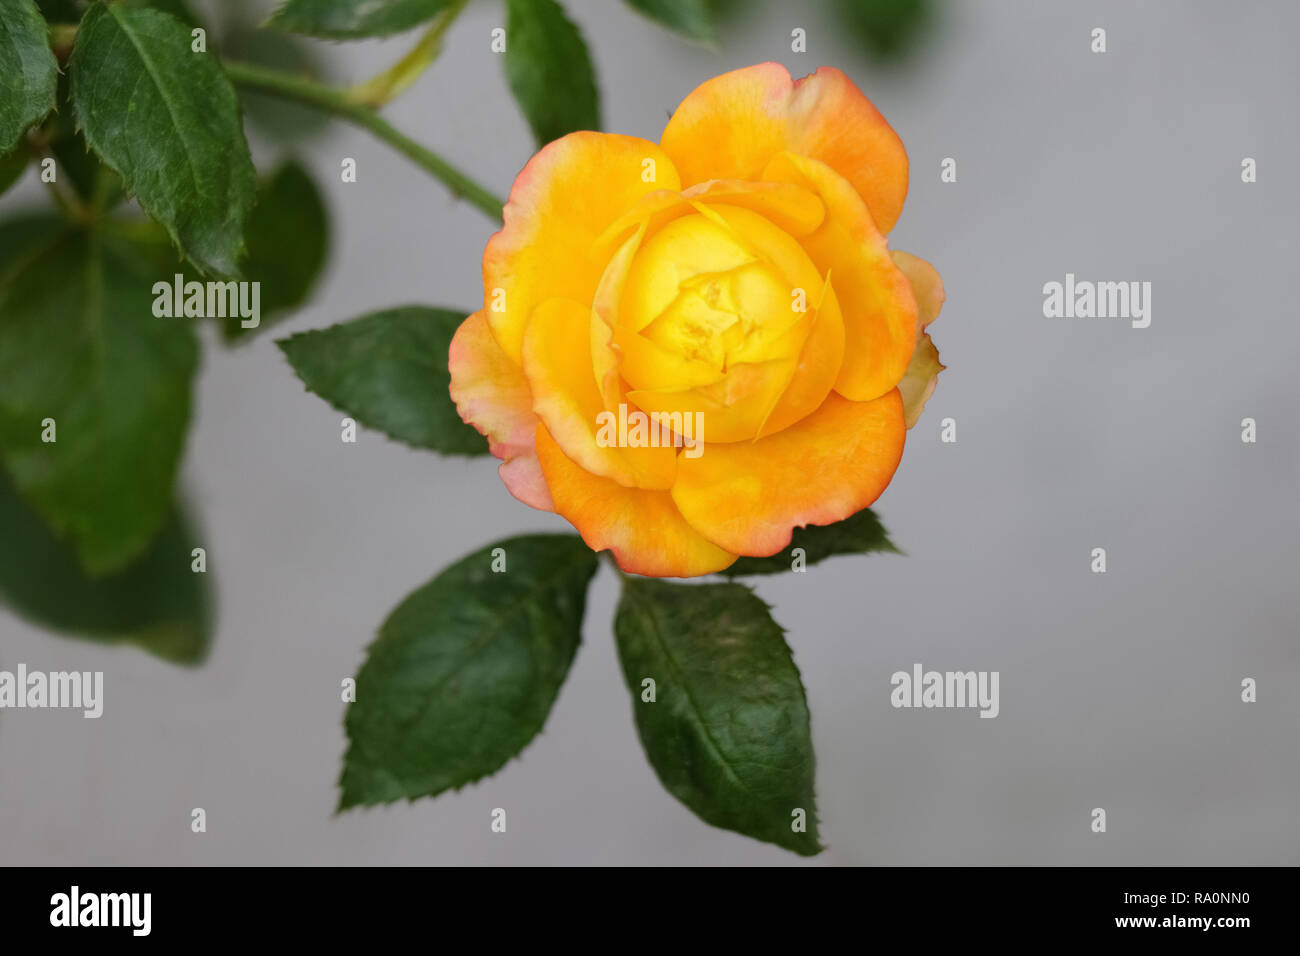 Goden yellow rose with green leaf blooming in garden, single rose Stock Photo